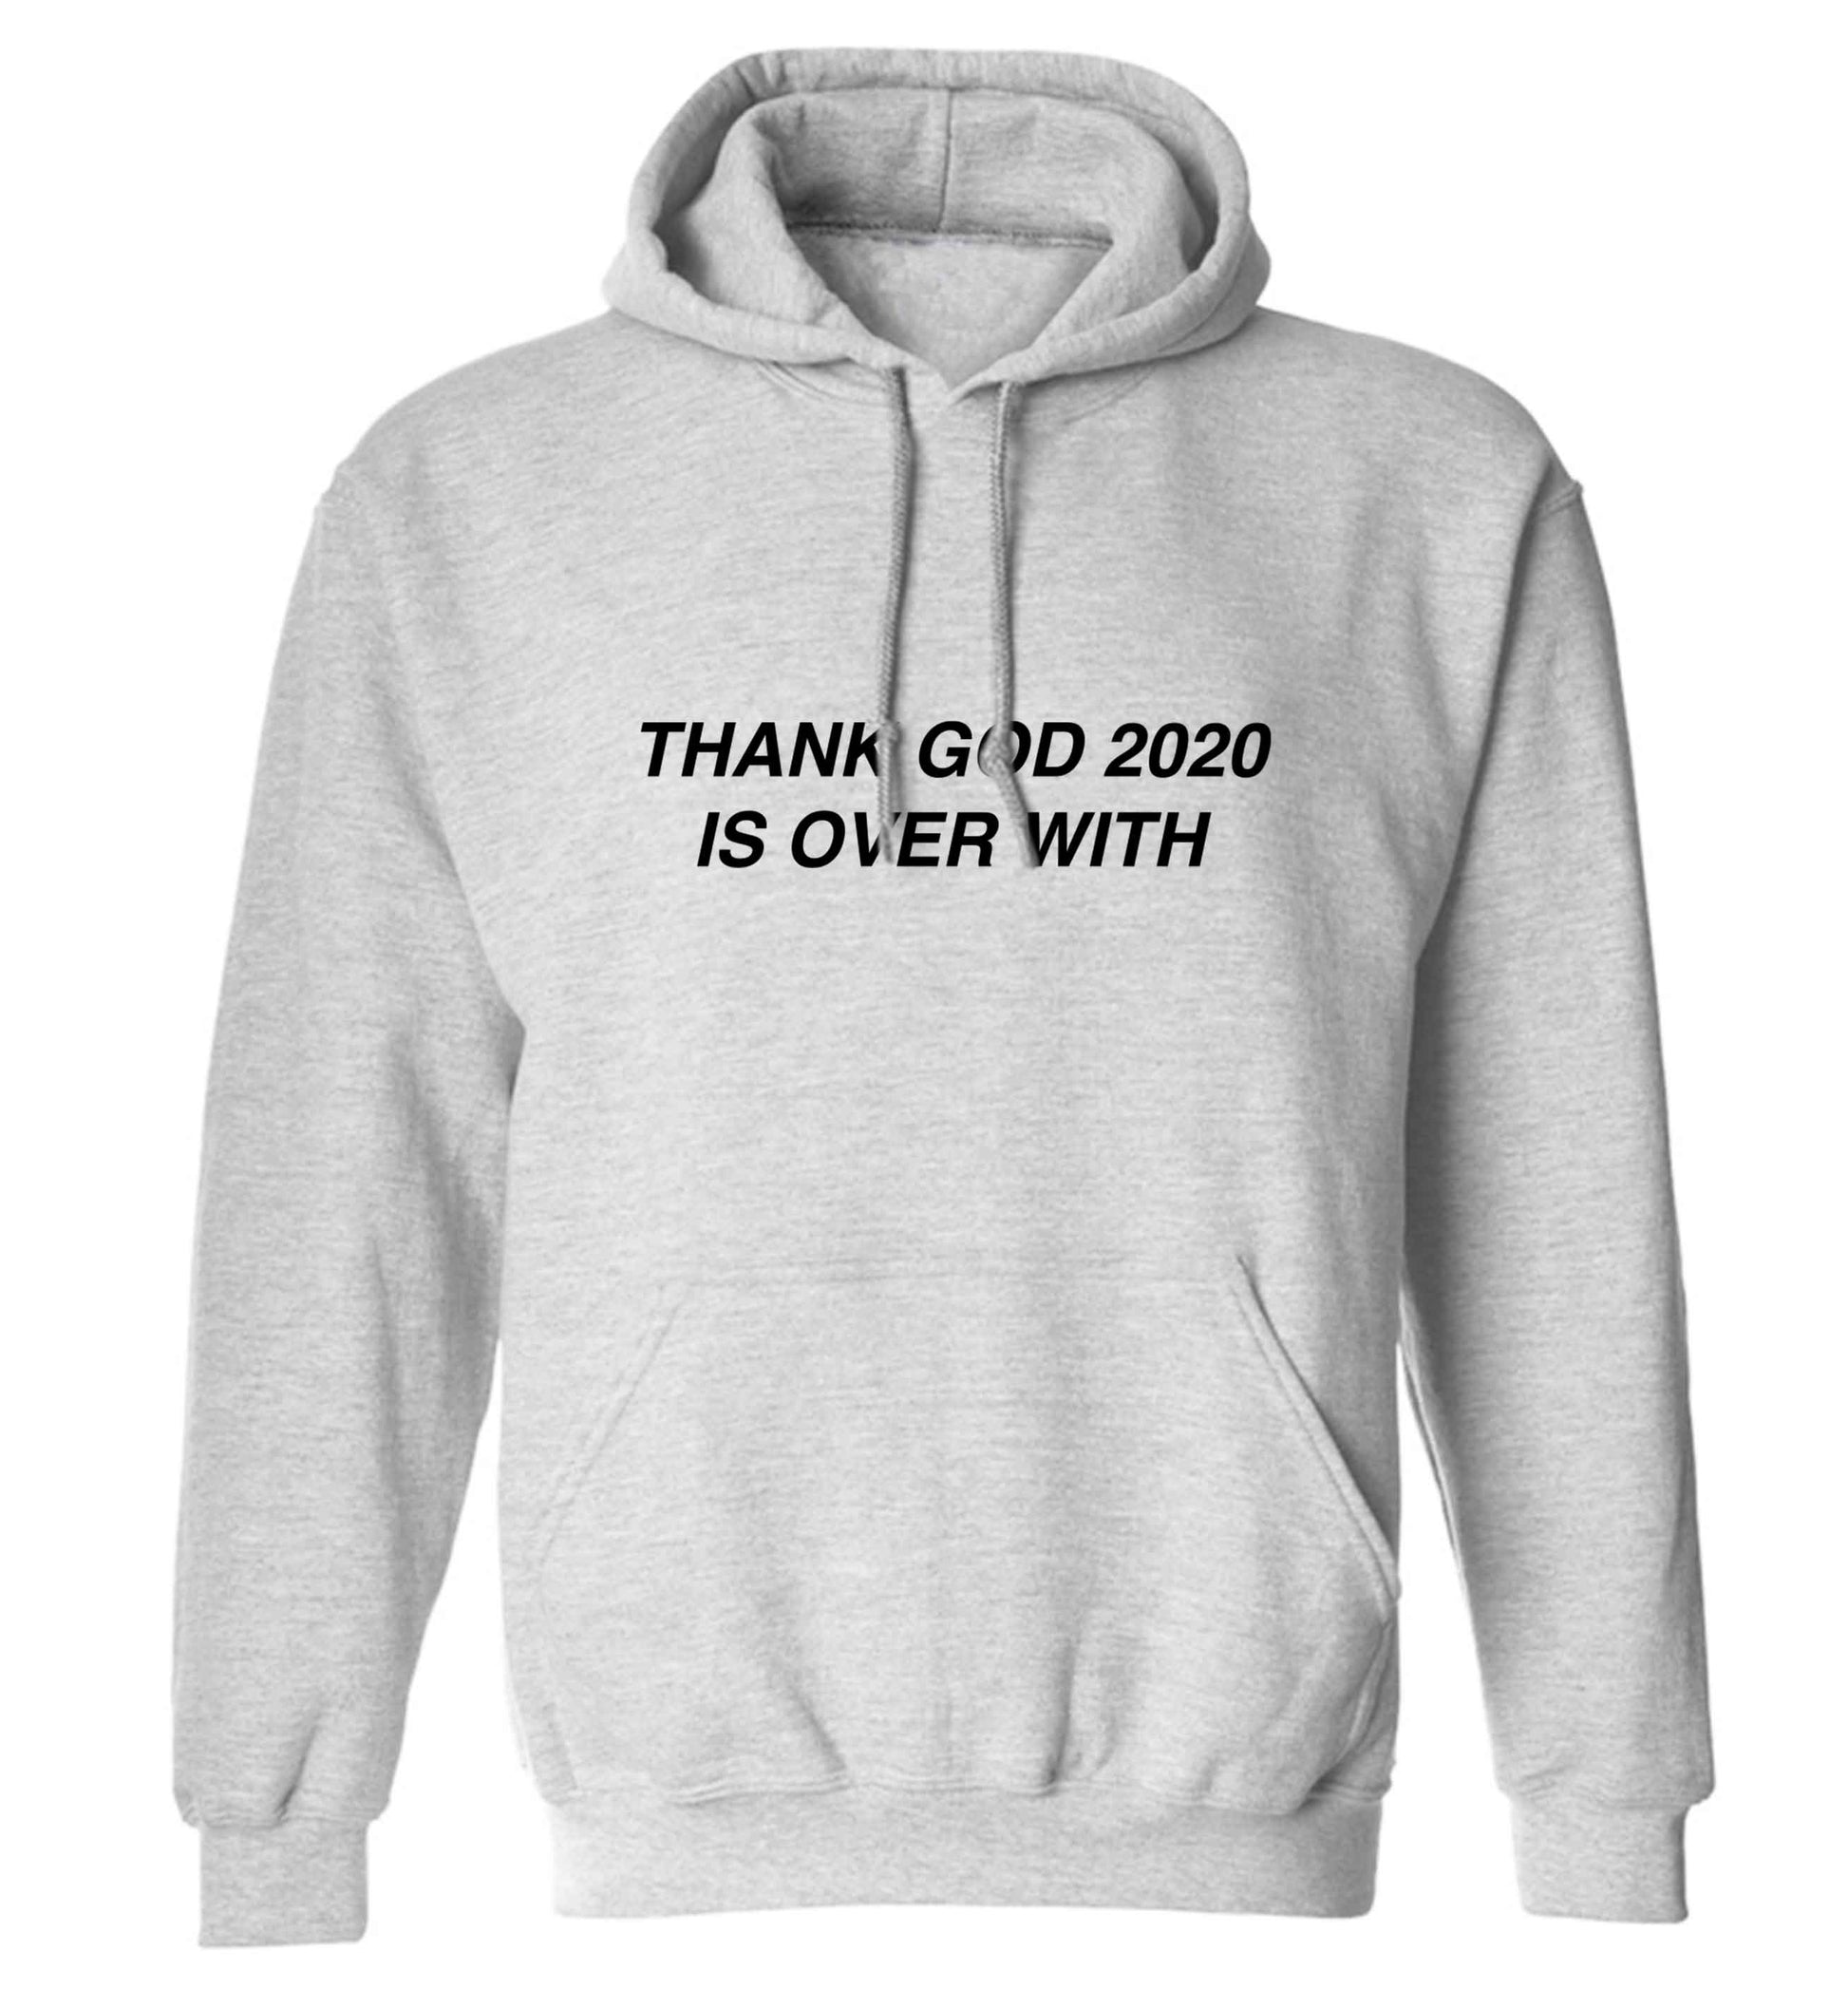 Thank god 2020 is over with adults unisex grey hoodie 2XL